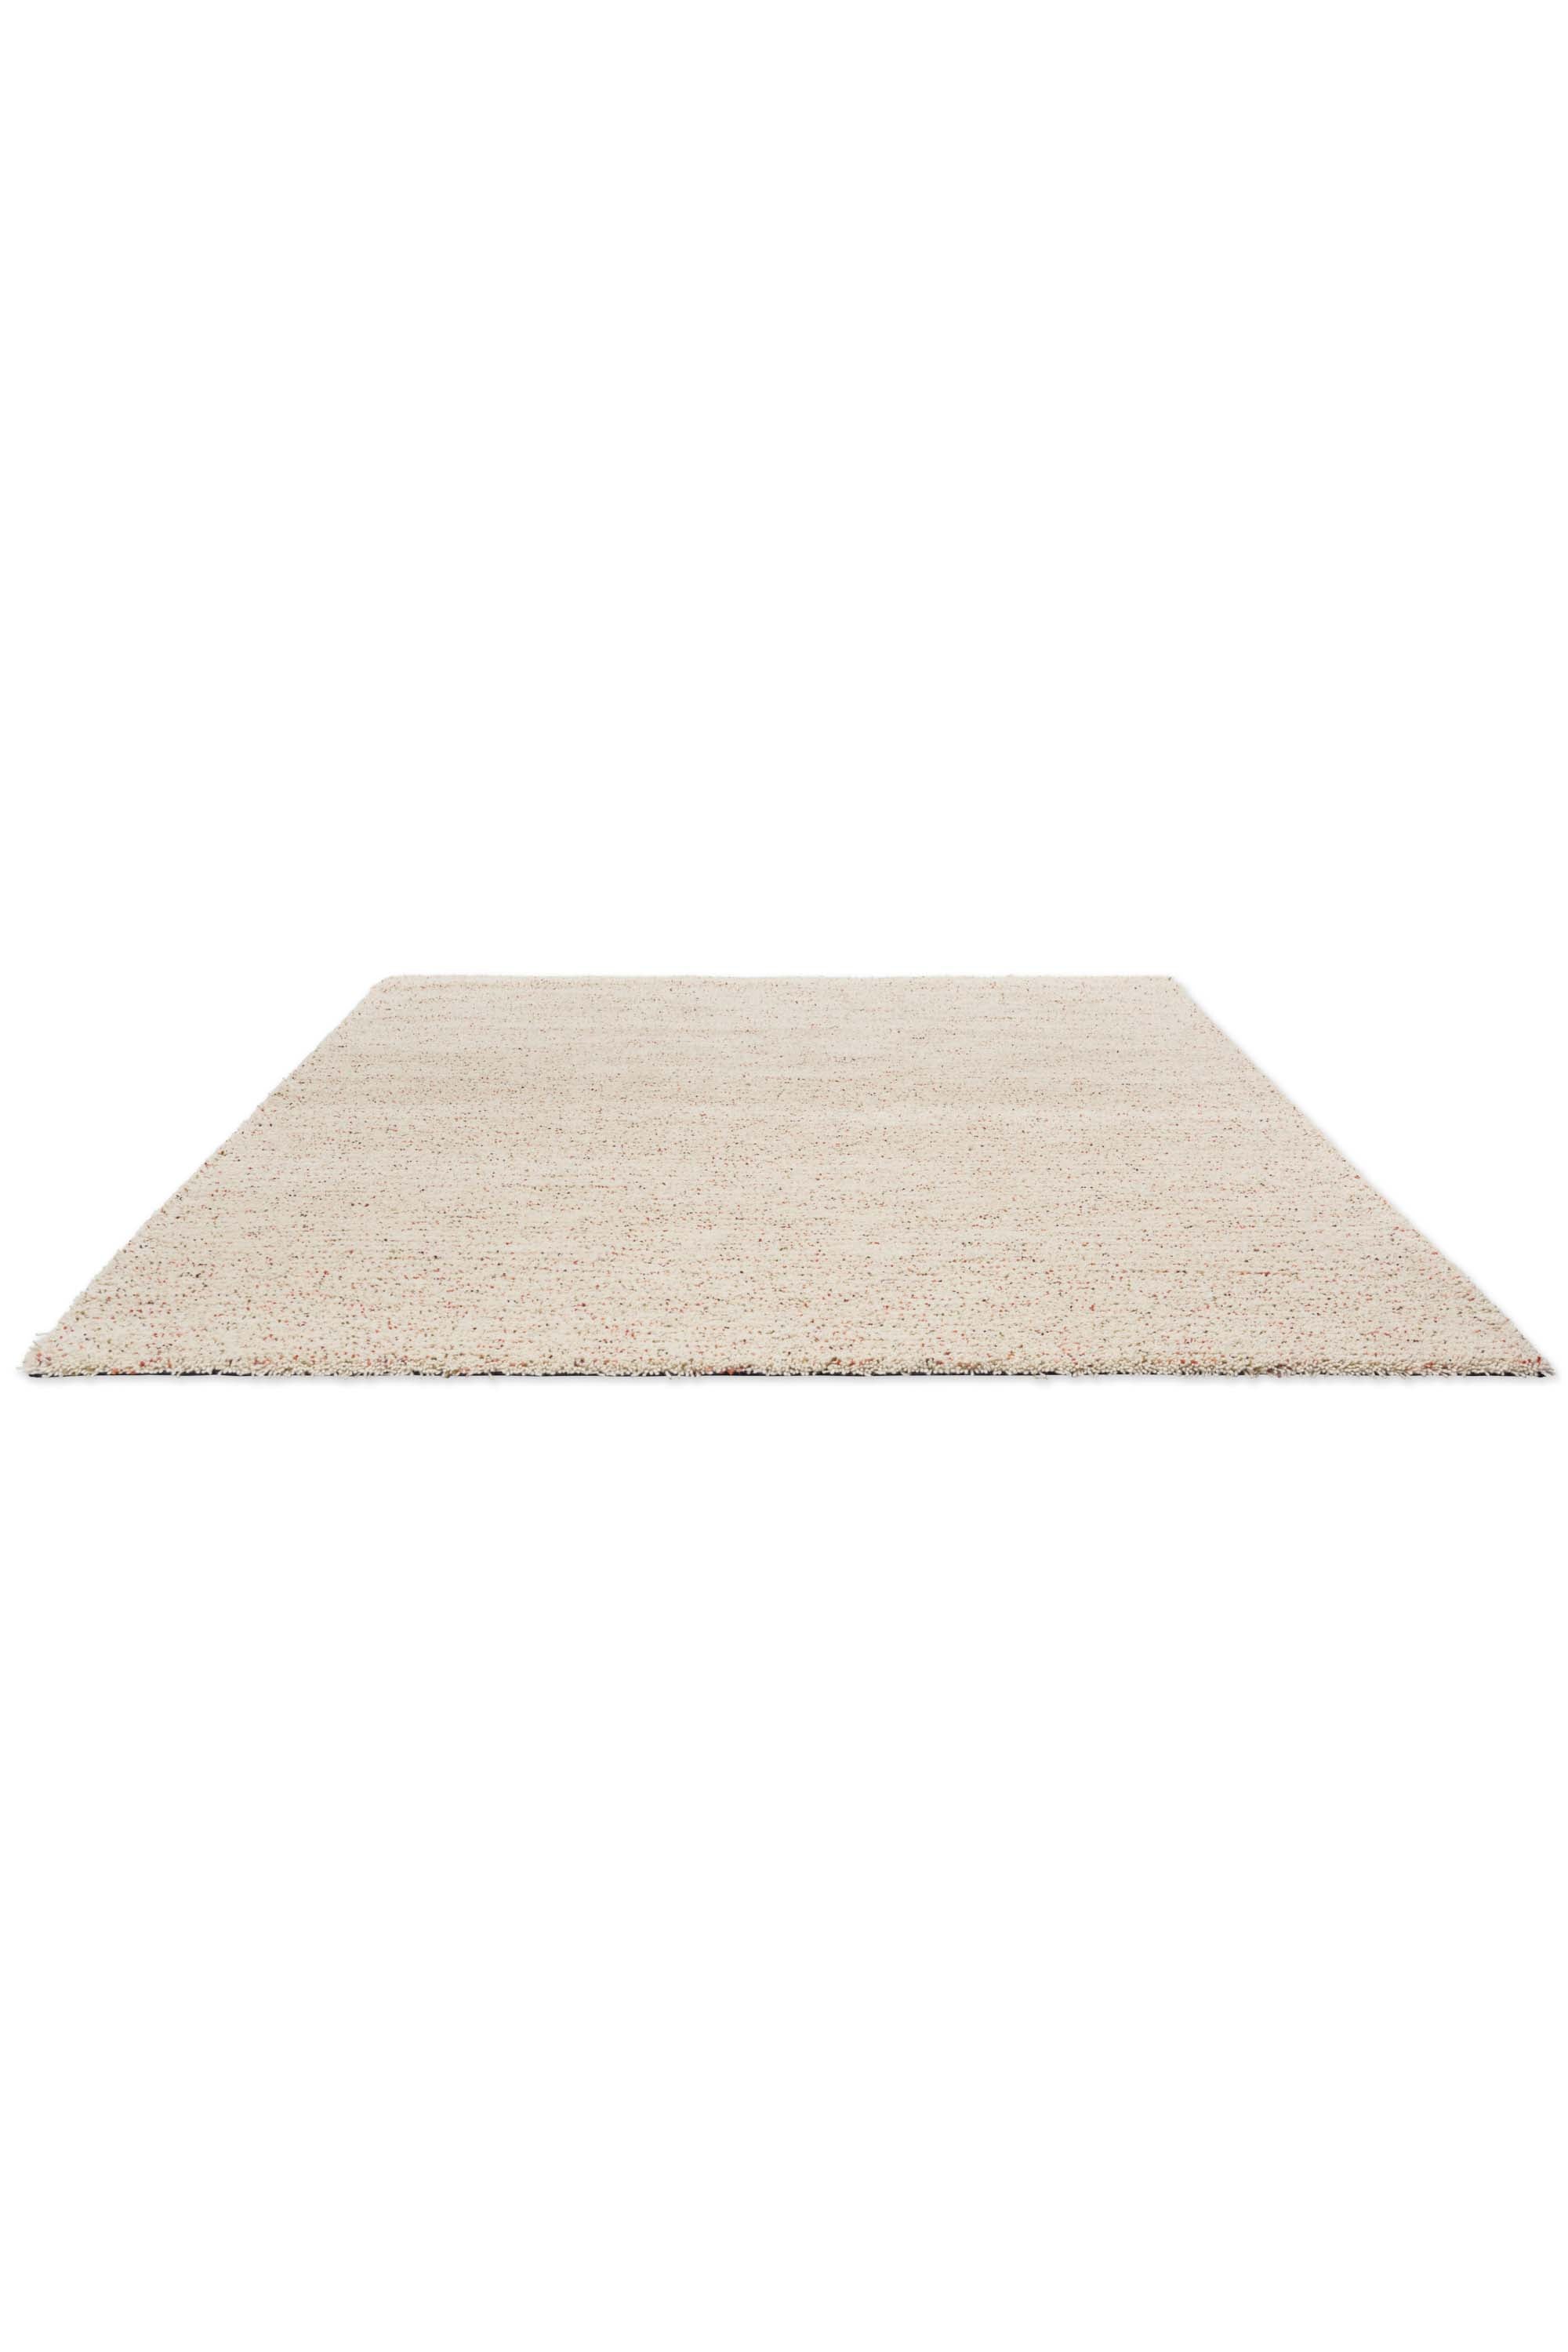 Plain textured rug with cream and multicolour pile